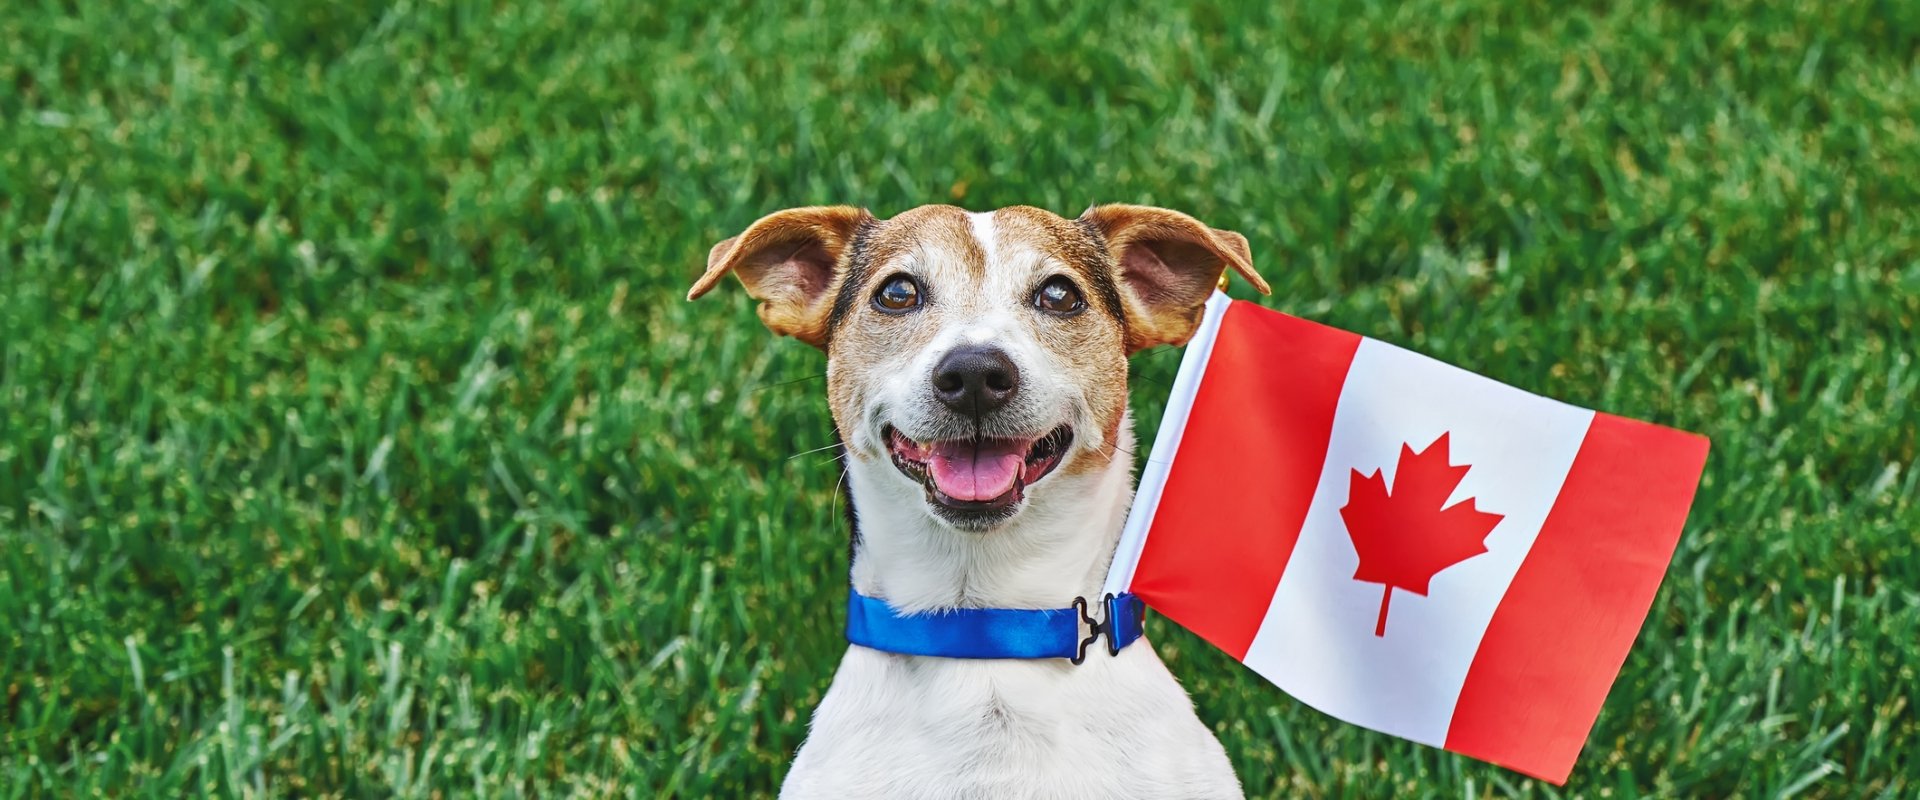 Dog with Canada Flage